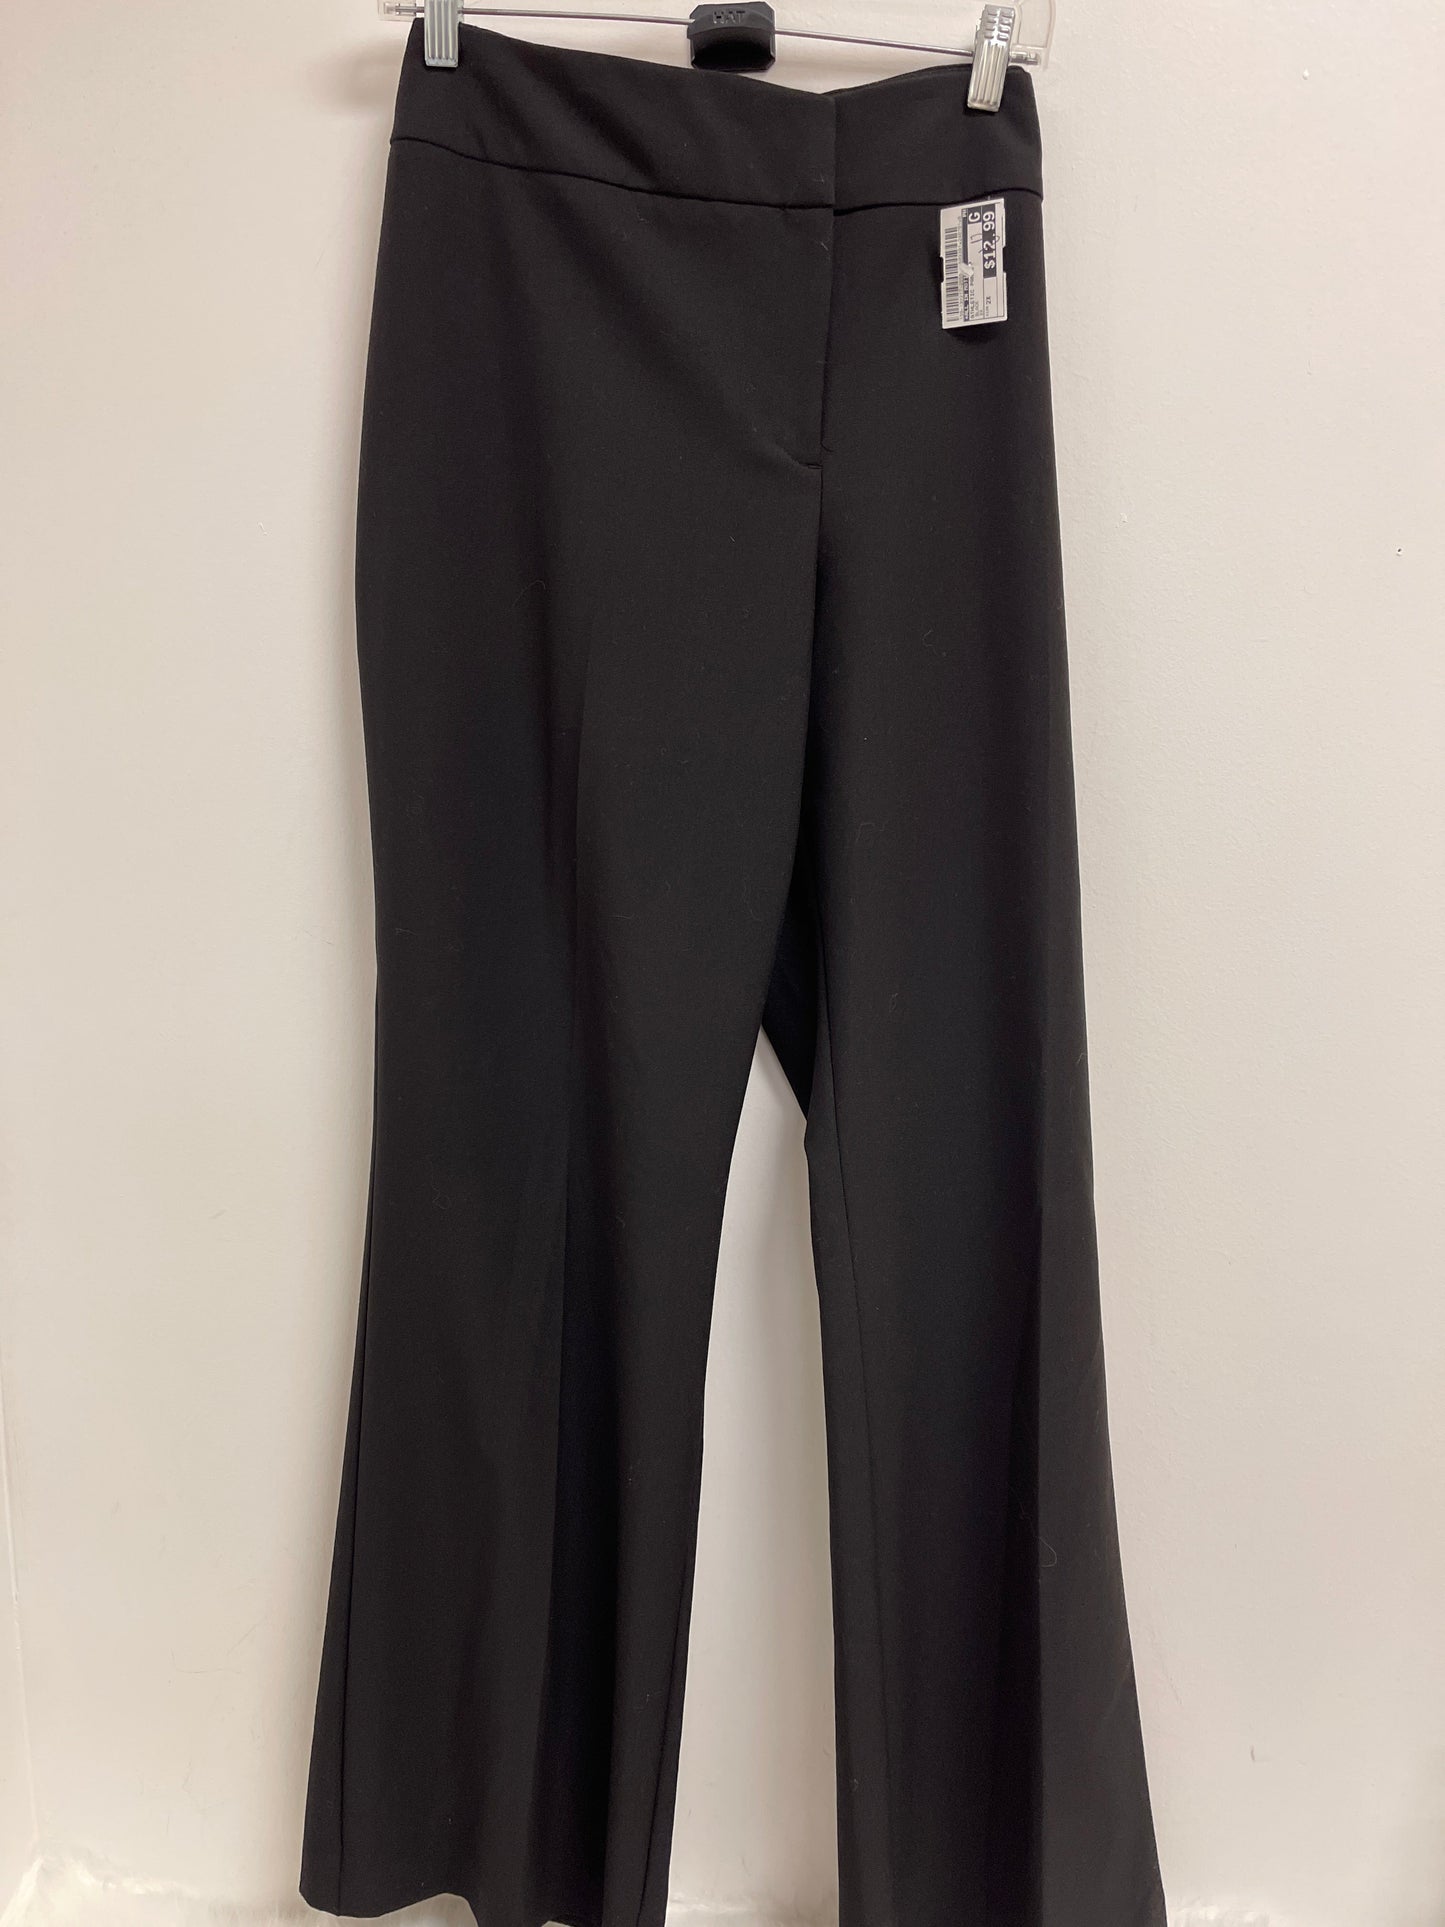 Black Athletic Pants All In Motion, Size 2x